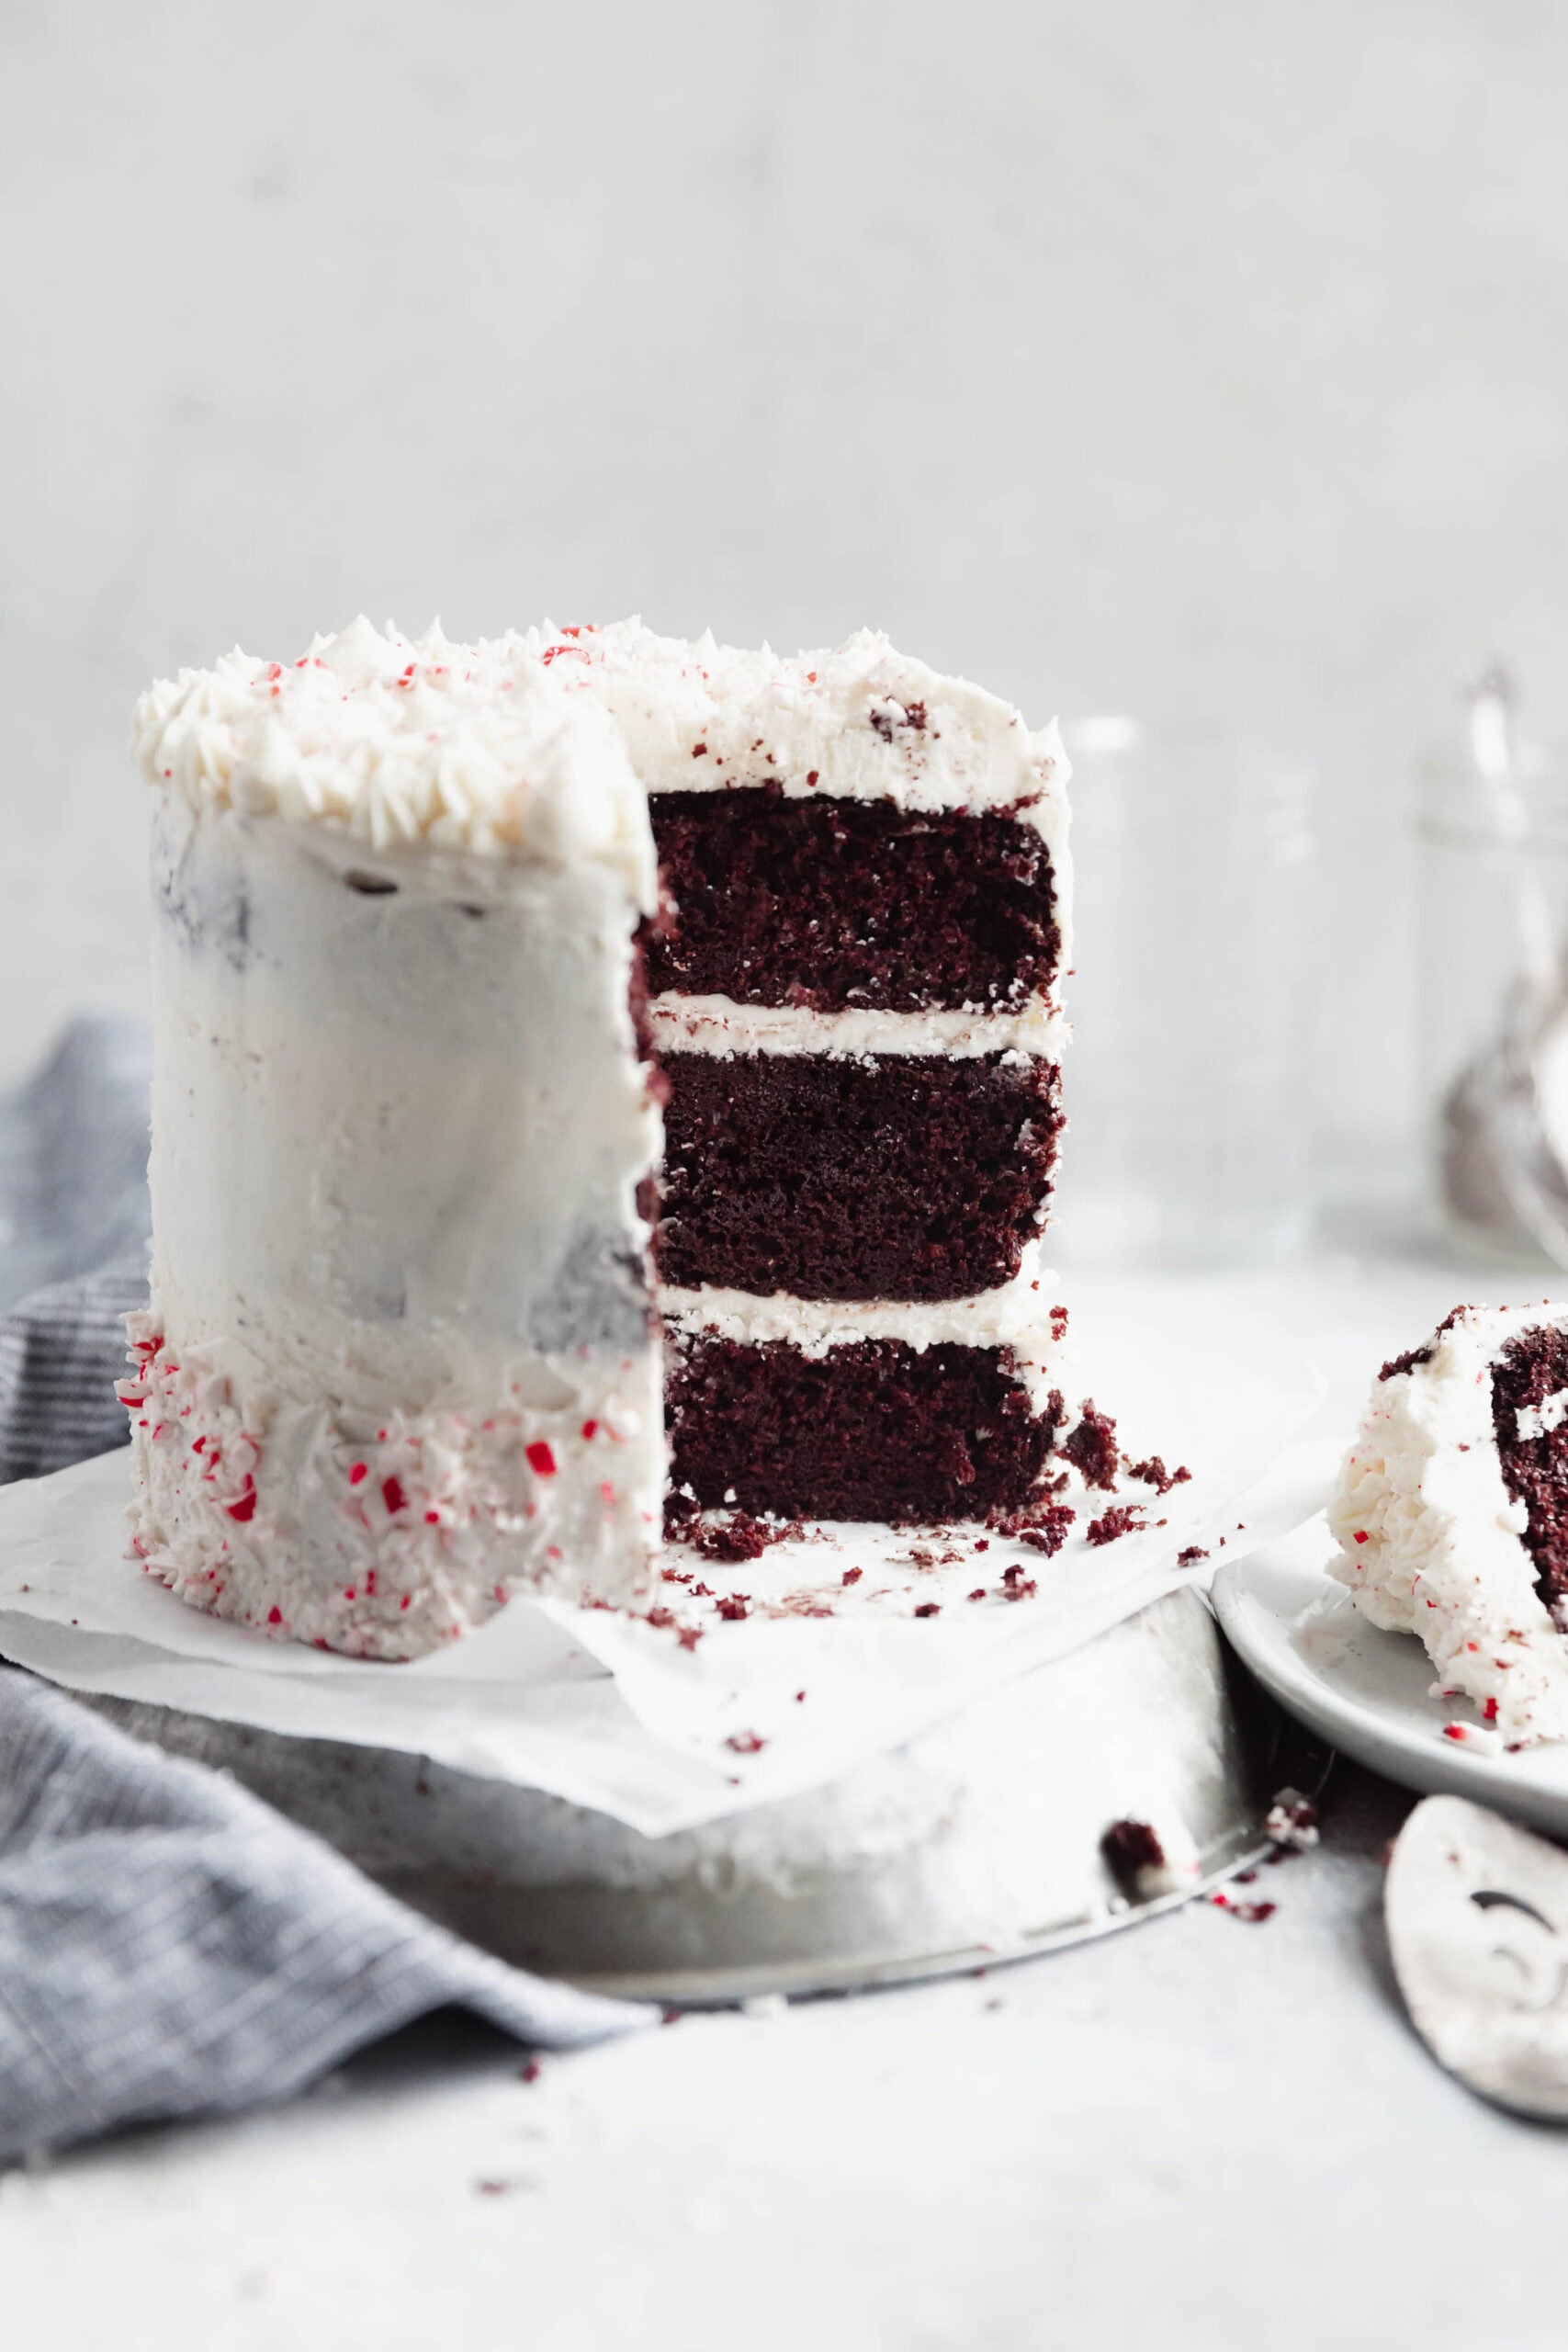 Channel all that holiday spirit into this peppermint chocolate cake AKA rich fudgy chocolate cake with thick layers of homemade peppermint buttercream! Yum!